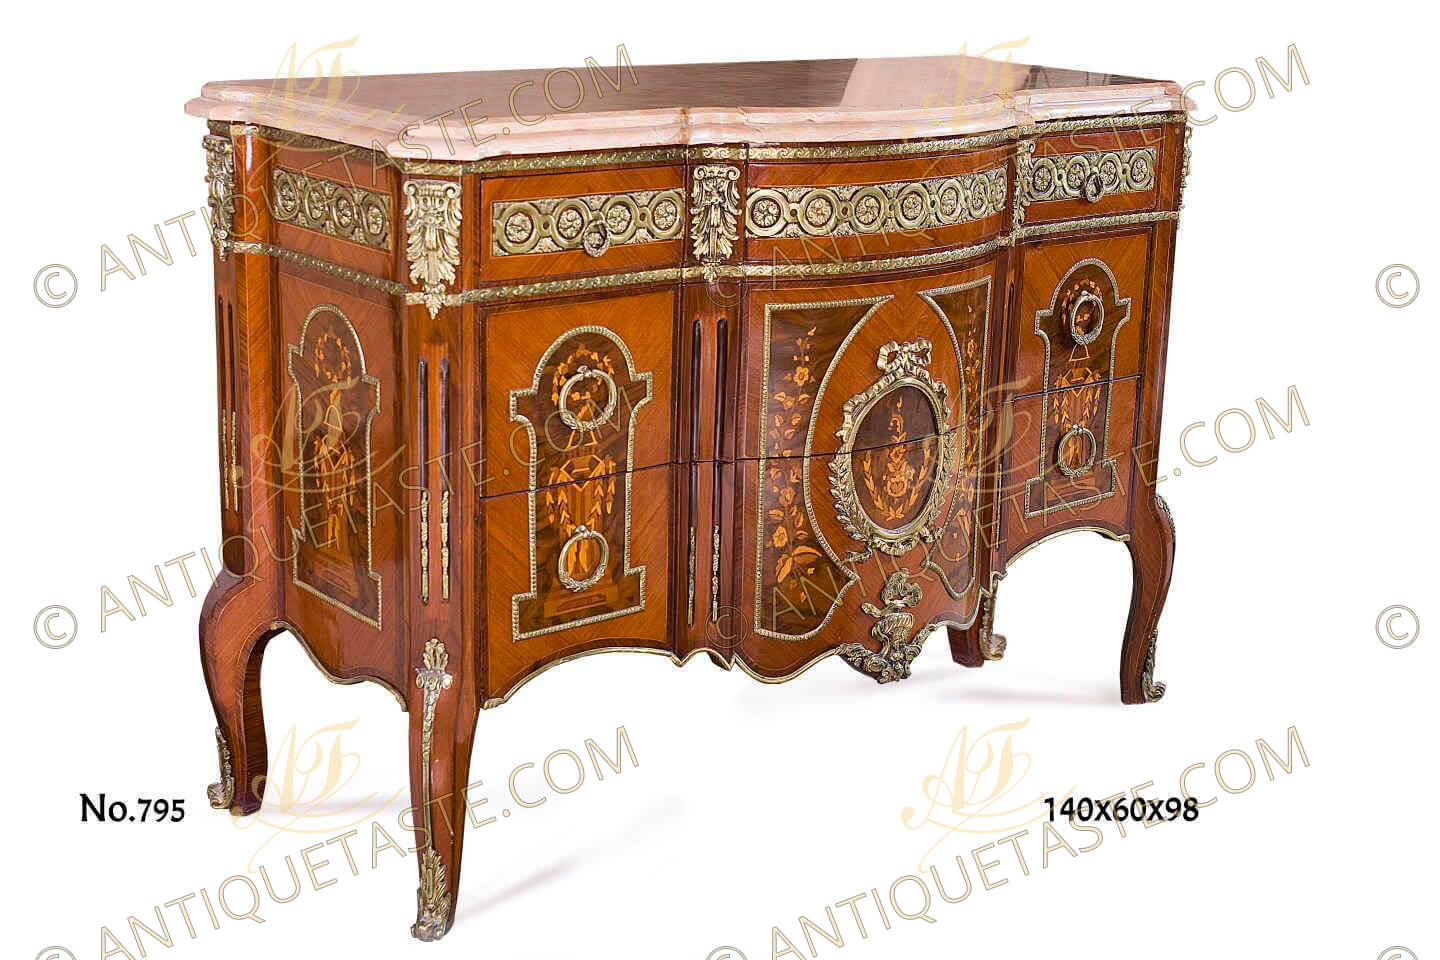 A transitional French marquetry commode, after the model by Pierre Antoine Foullet, late 19th century, with featured molded and shaped marble top above ormolu engraved bands on two small drawers to each side supported by a conforming case of two larger drawers, with ormolu mounts ornamentation of ormolu bands, foliate ormolu mounts and ribbons, light and dark inlays of marquetry and veneers raised on cabriole legs with foliate ormolu cast sabots